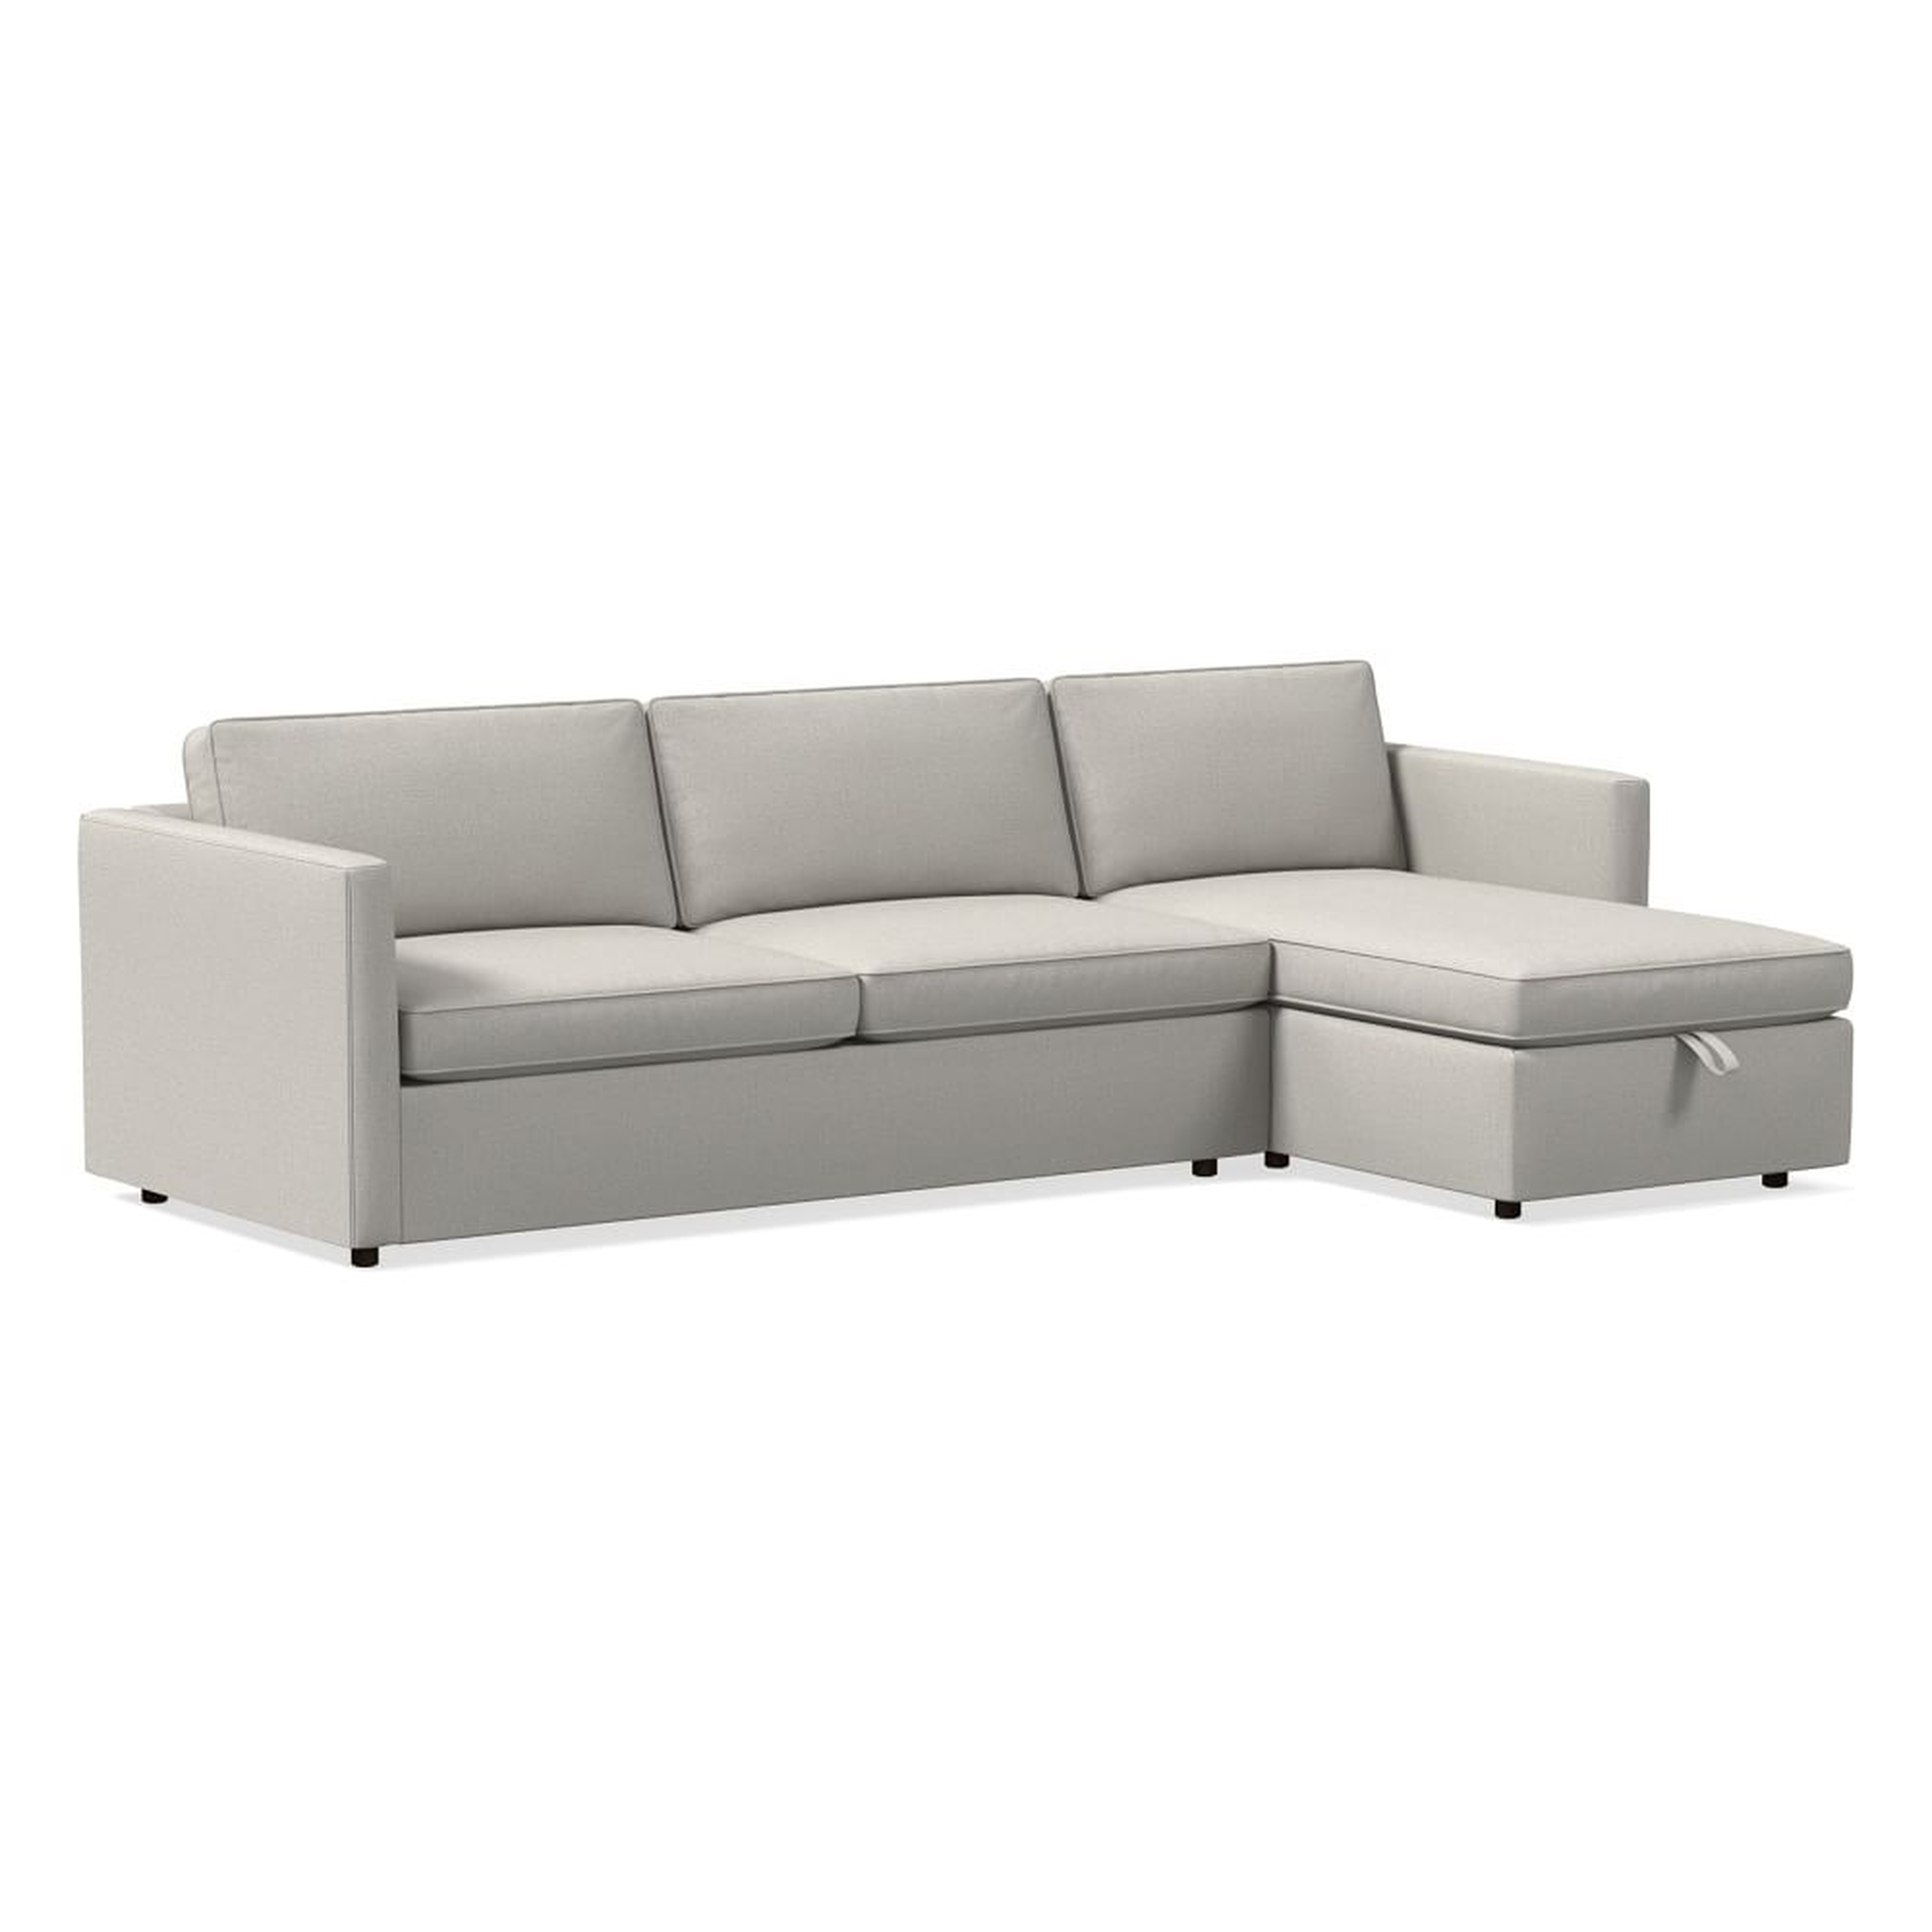 Harris 111" Right Multi Seat 2-Piece Chaise Sectional w/ Storage, Standard Depth, Performance Yarn Dyed Linen Weave, Frost Gray - West Elm